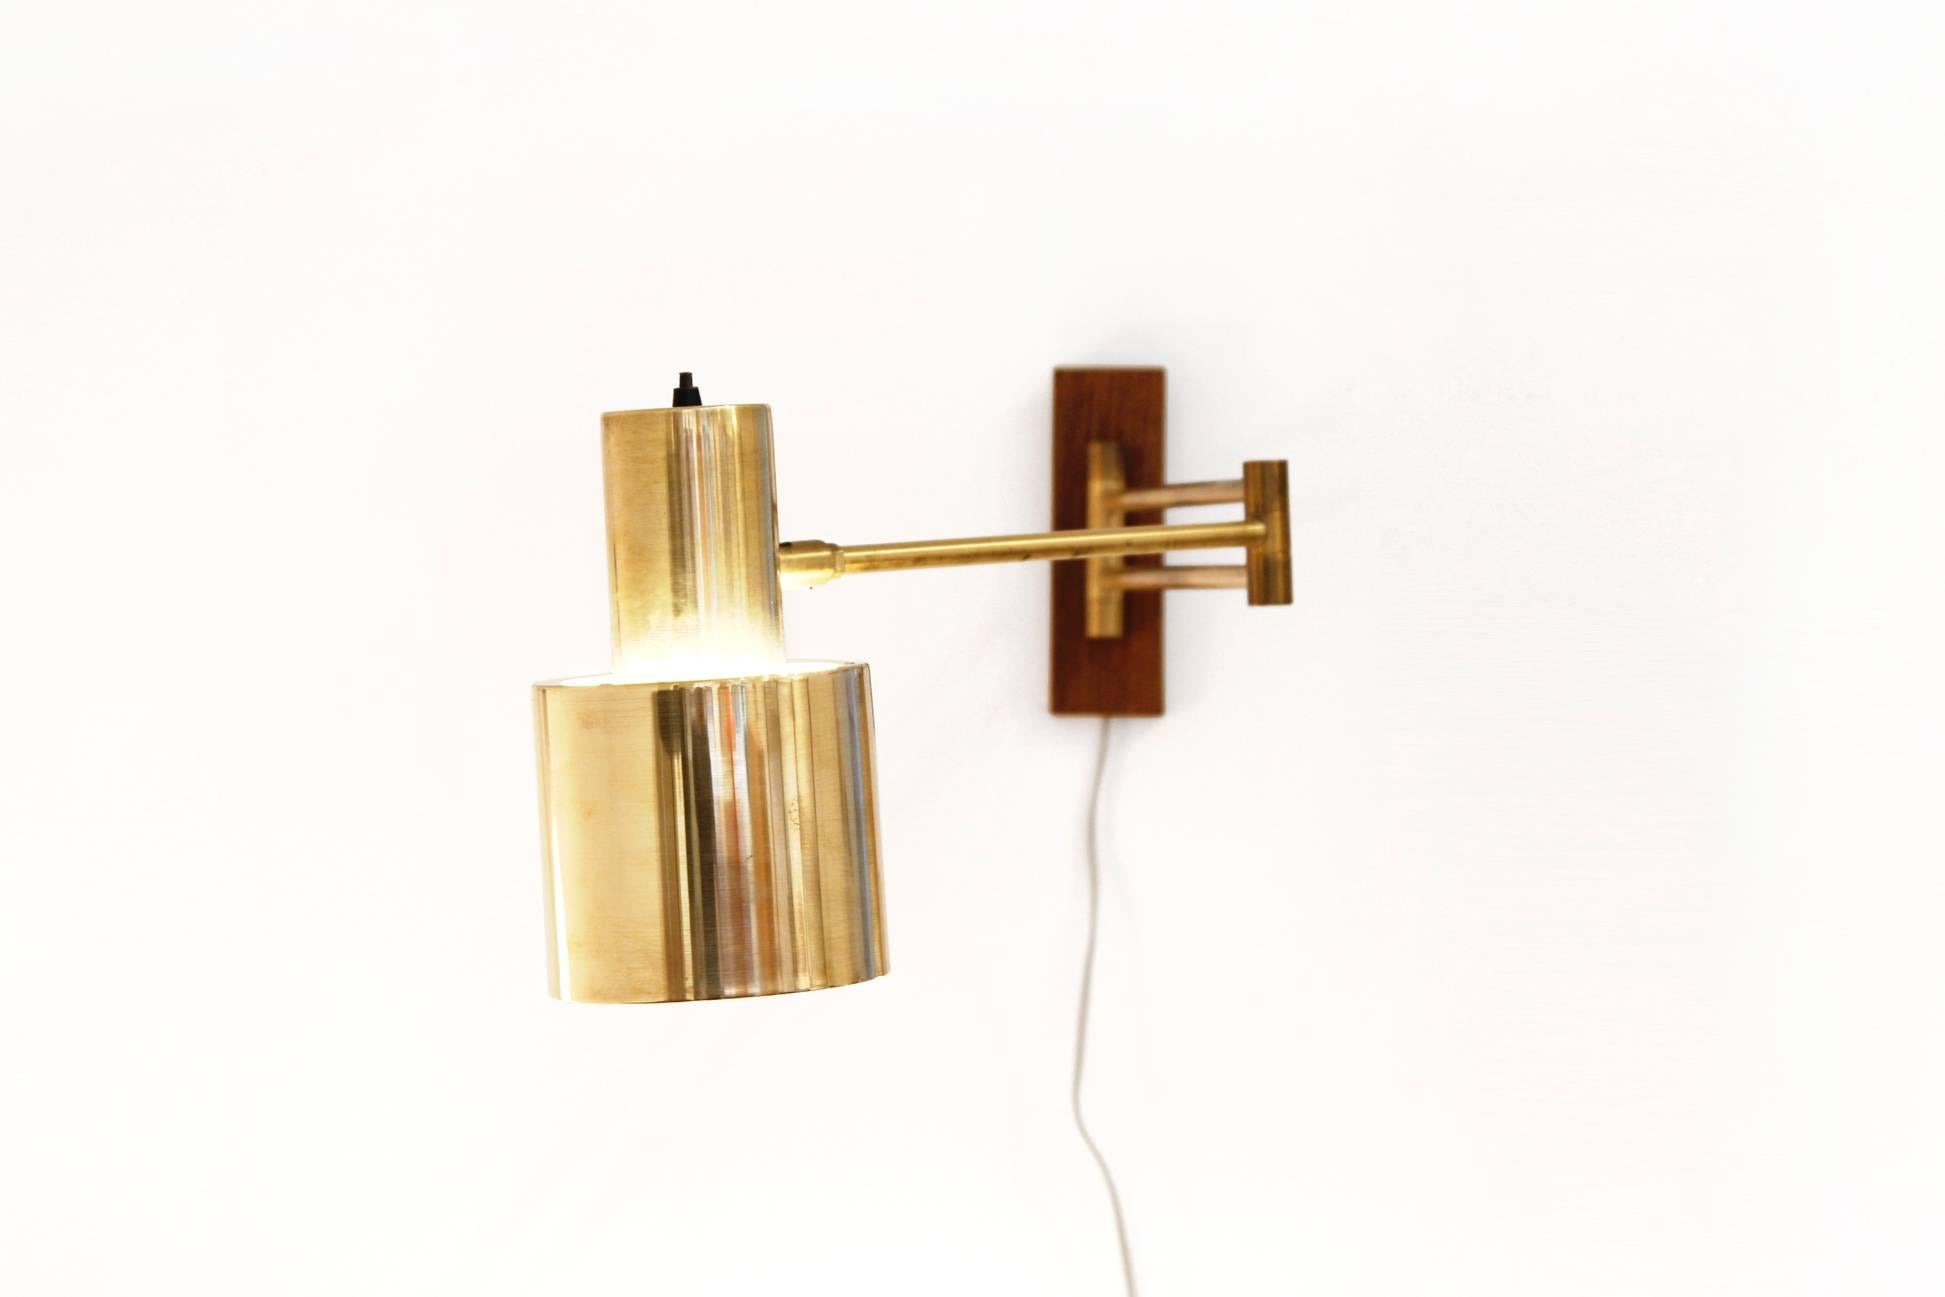 Very nice and complete adjustable wall lamp by Jo Hammerborg for Fog & Mørup, Denmark. It's the model 'Horizont' which is made of solid brass with a brass arm and a teak veneered wall support. The wall mount has a 180 degree turn. The shade itself